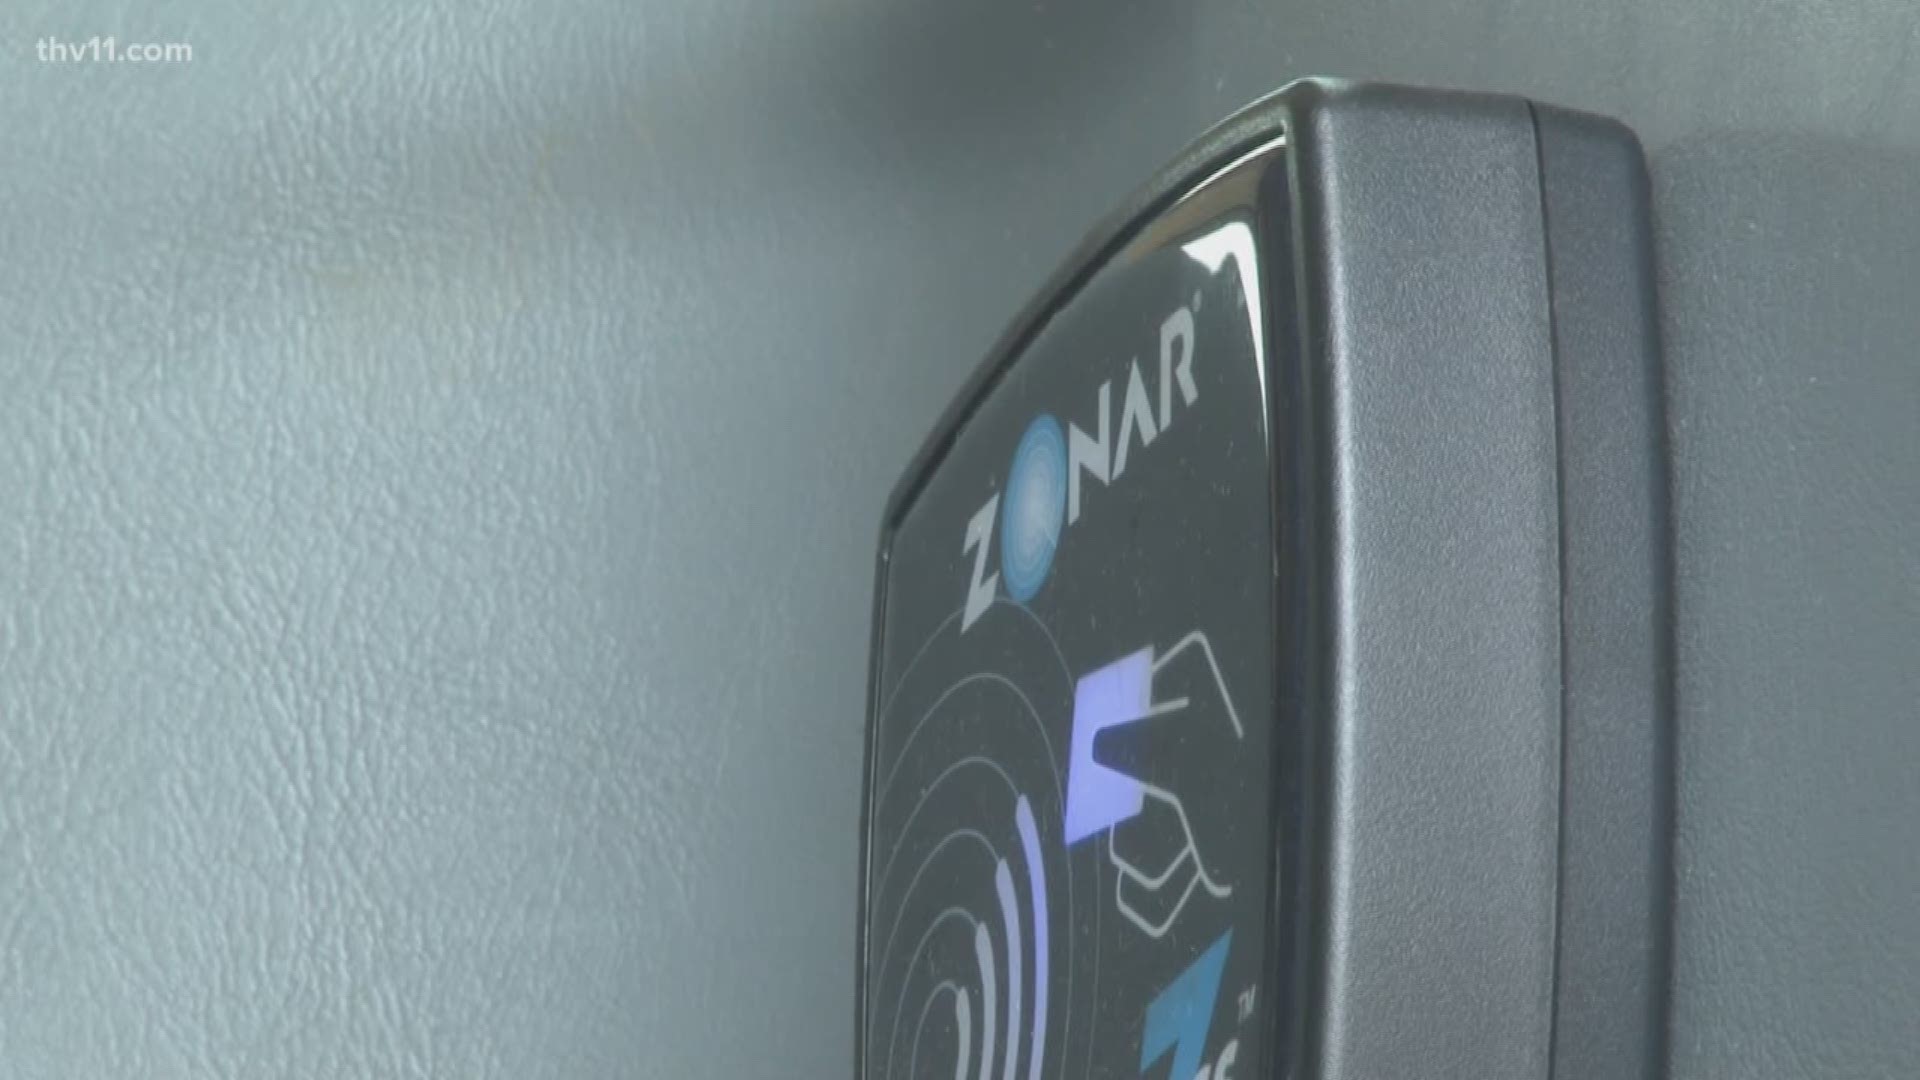 The Jacksonville North Pulaski School District is the first district in the state to have the full Z-Pass system in place. Parents can see where their child is through an app on their phone called SafeStop.